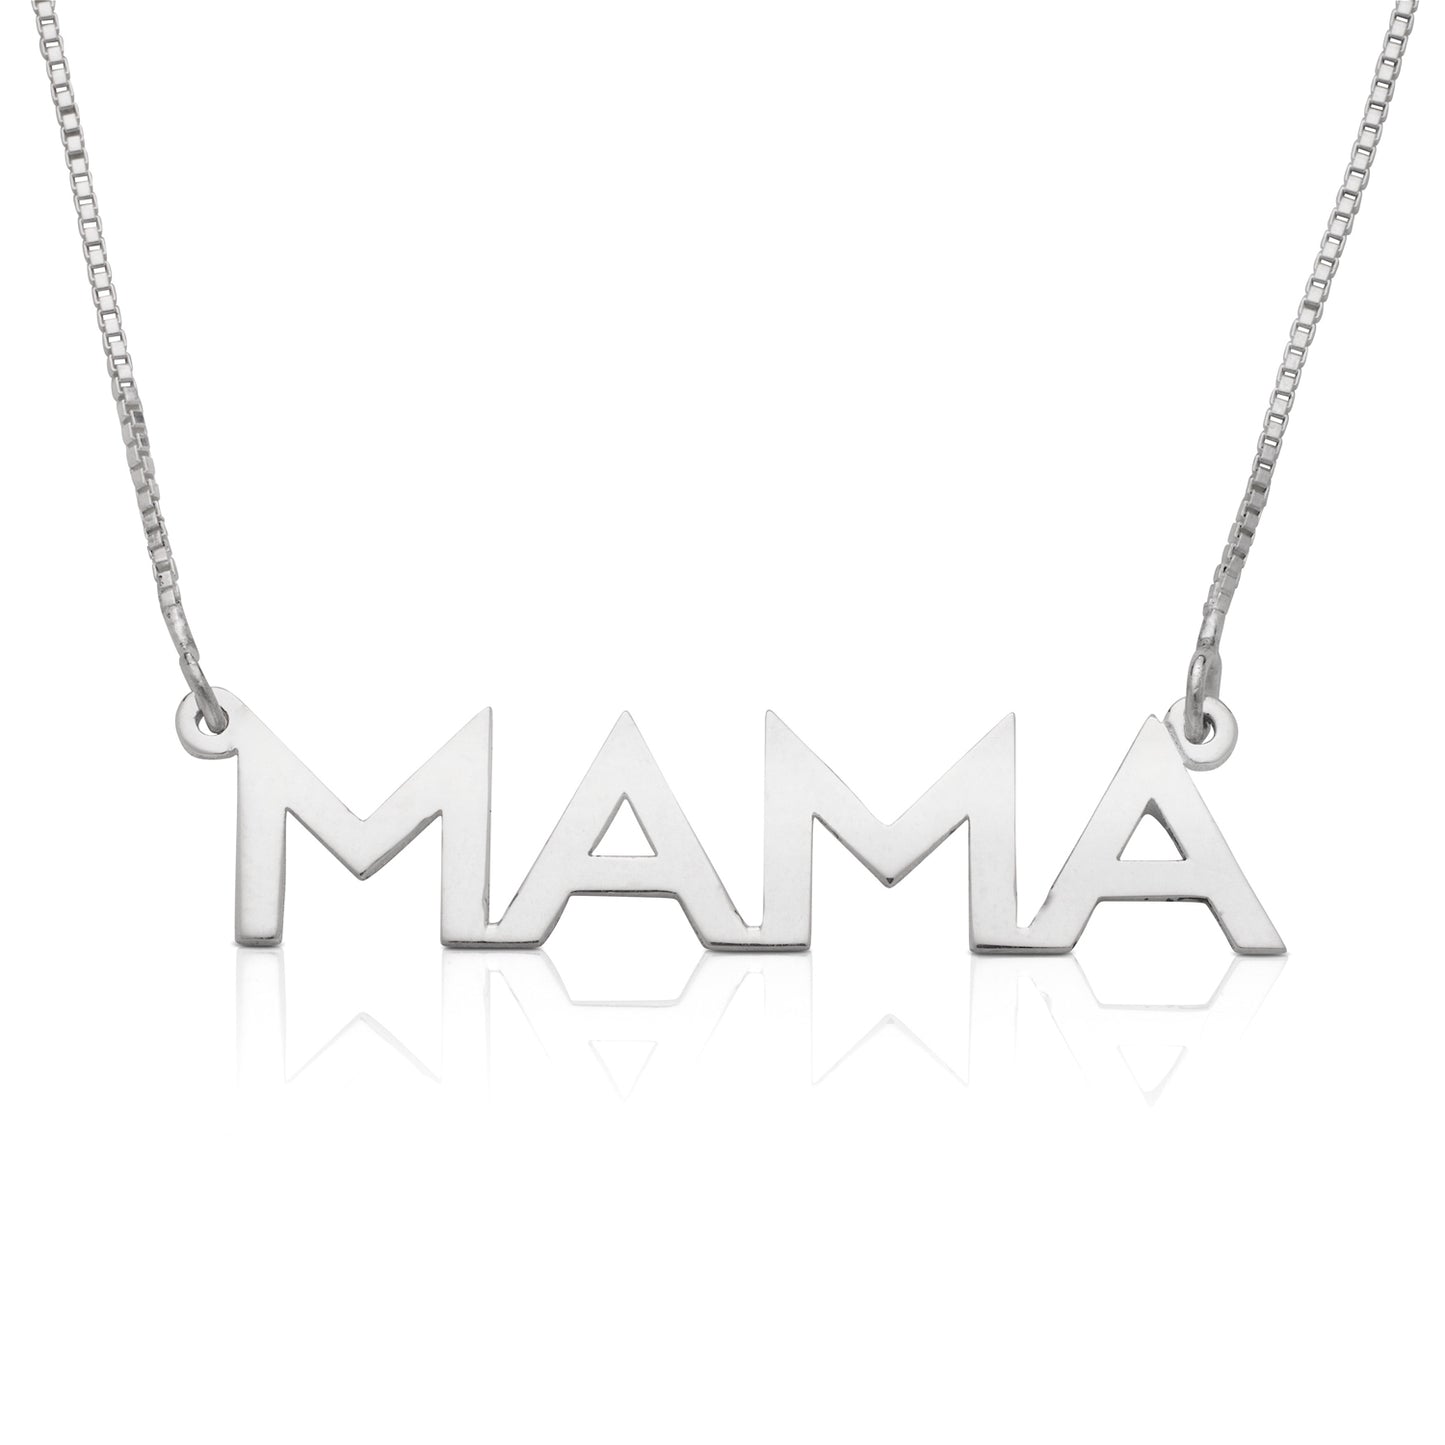 Better Jewelry Personalized .925 Sterling Silver Sleek Block Name Necklace (MADE IN USA)